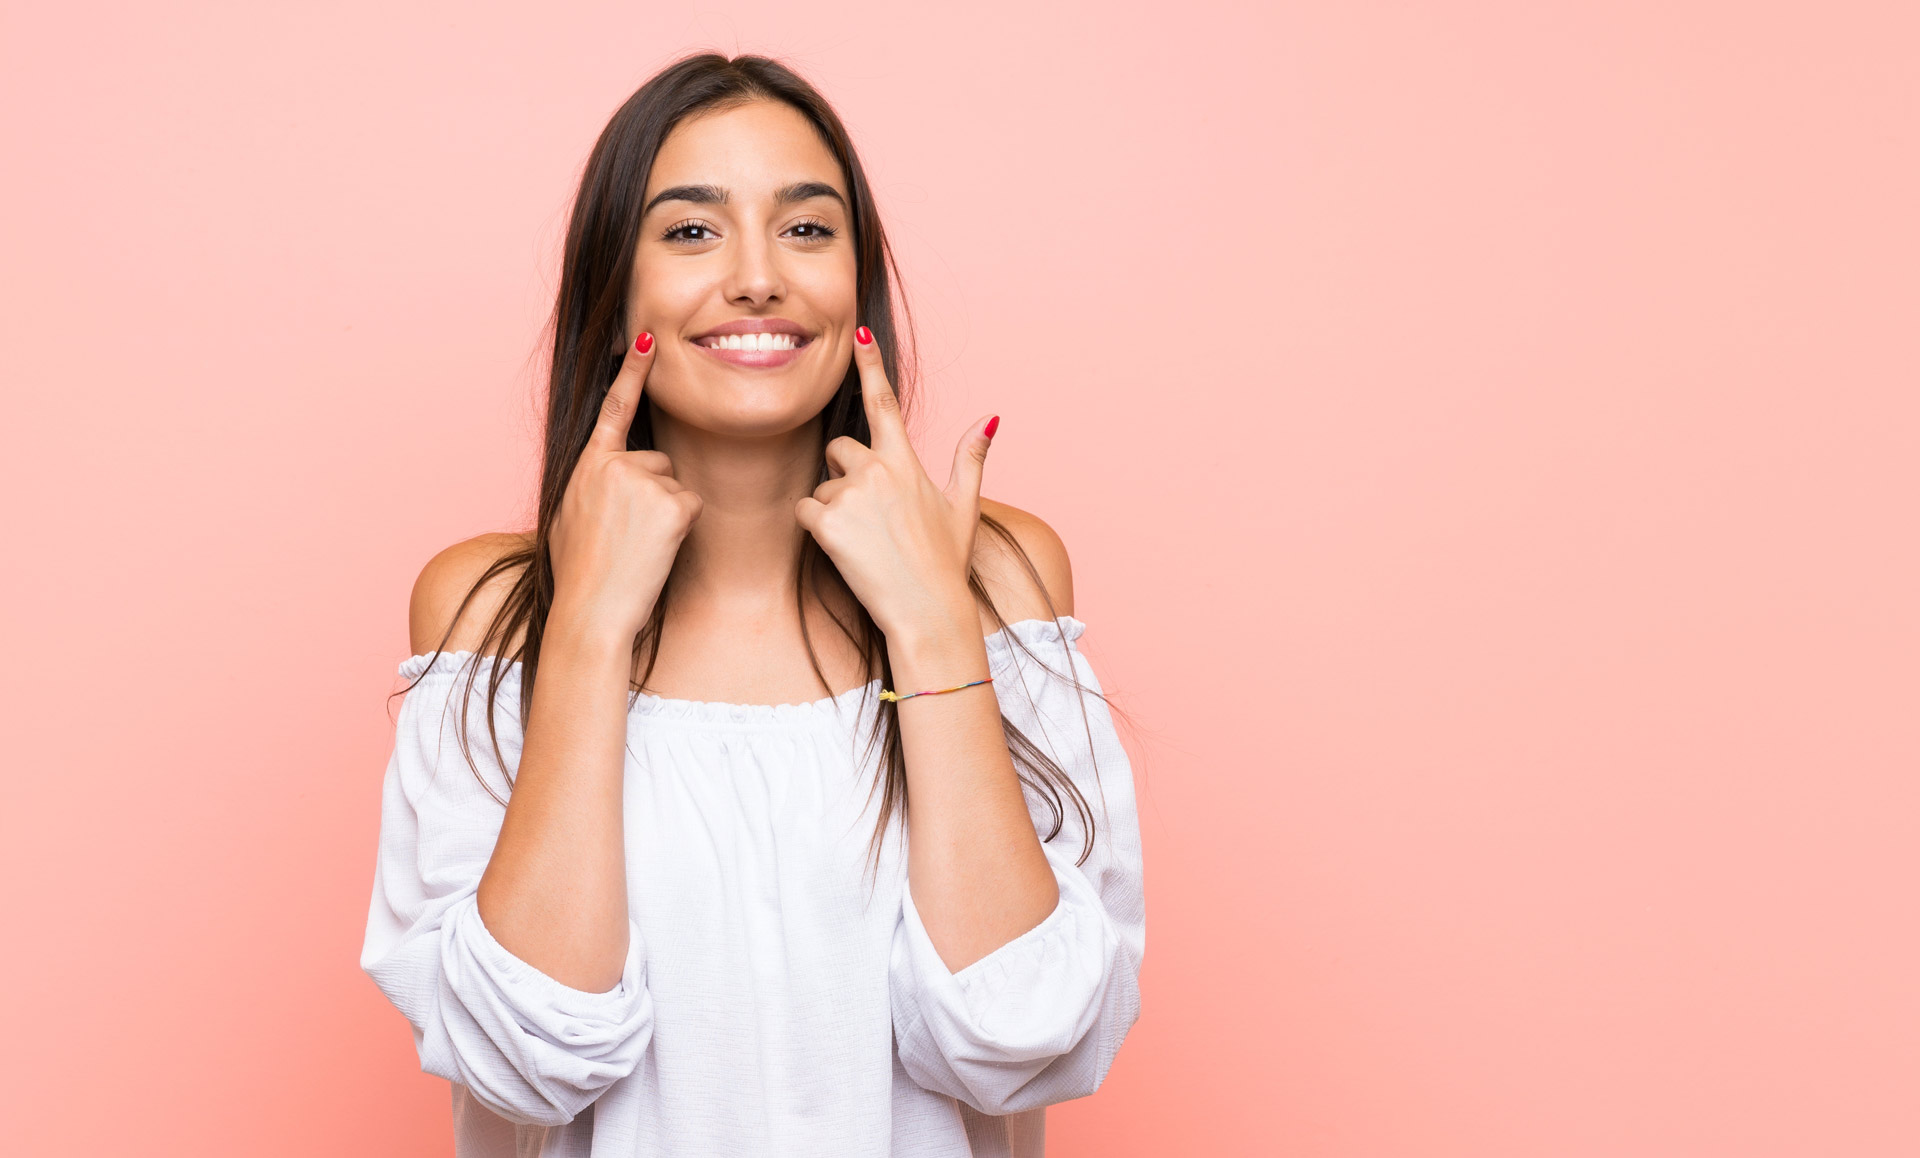 Teeth straightening – it’s not just for teenagers!